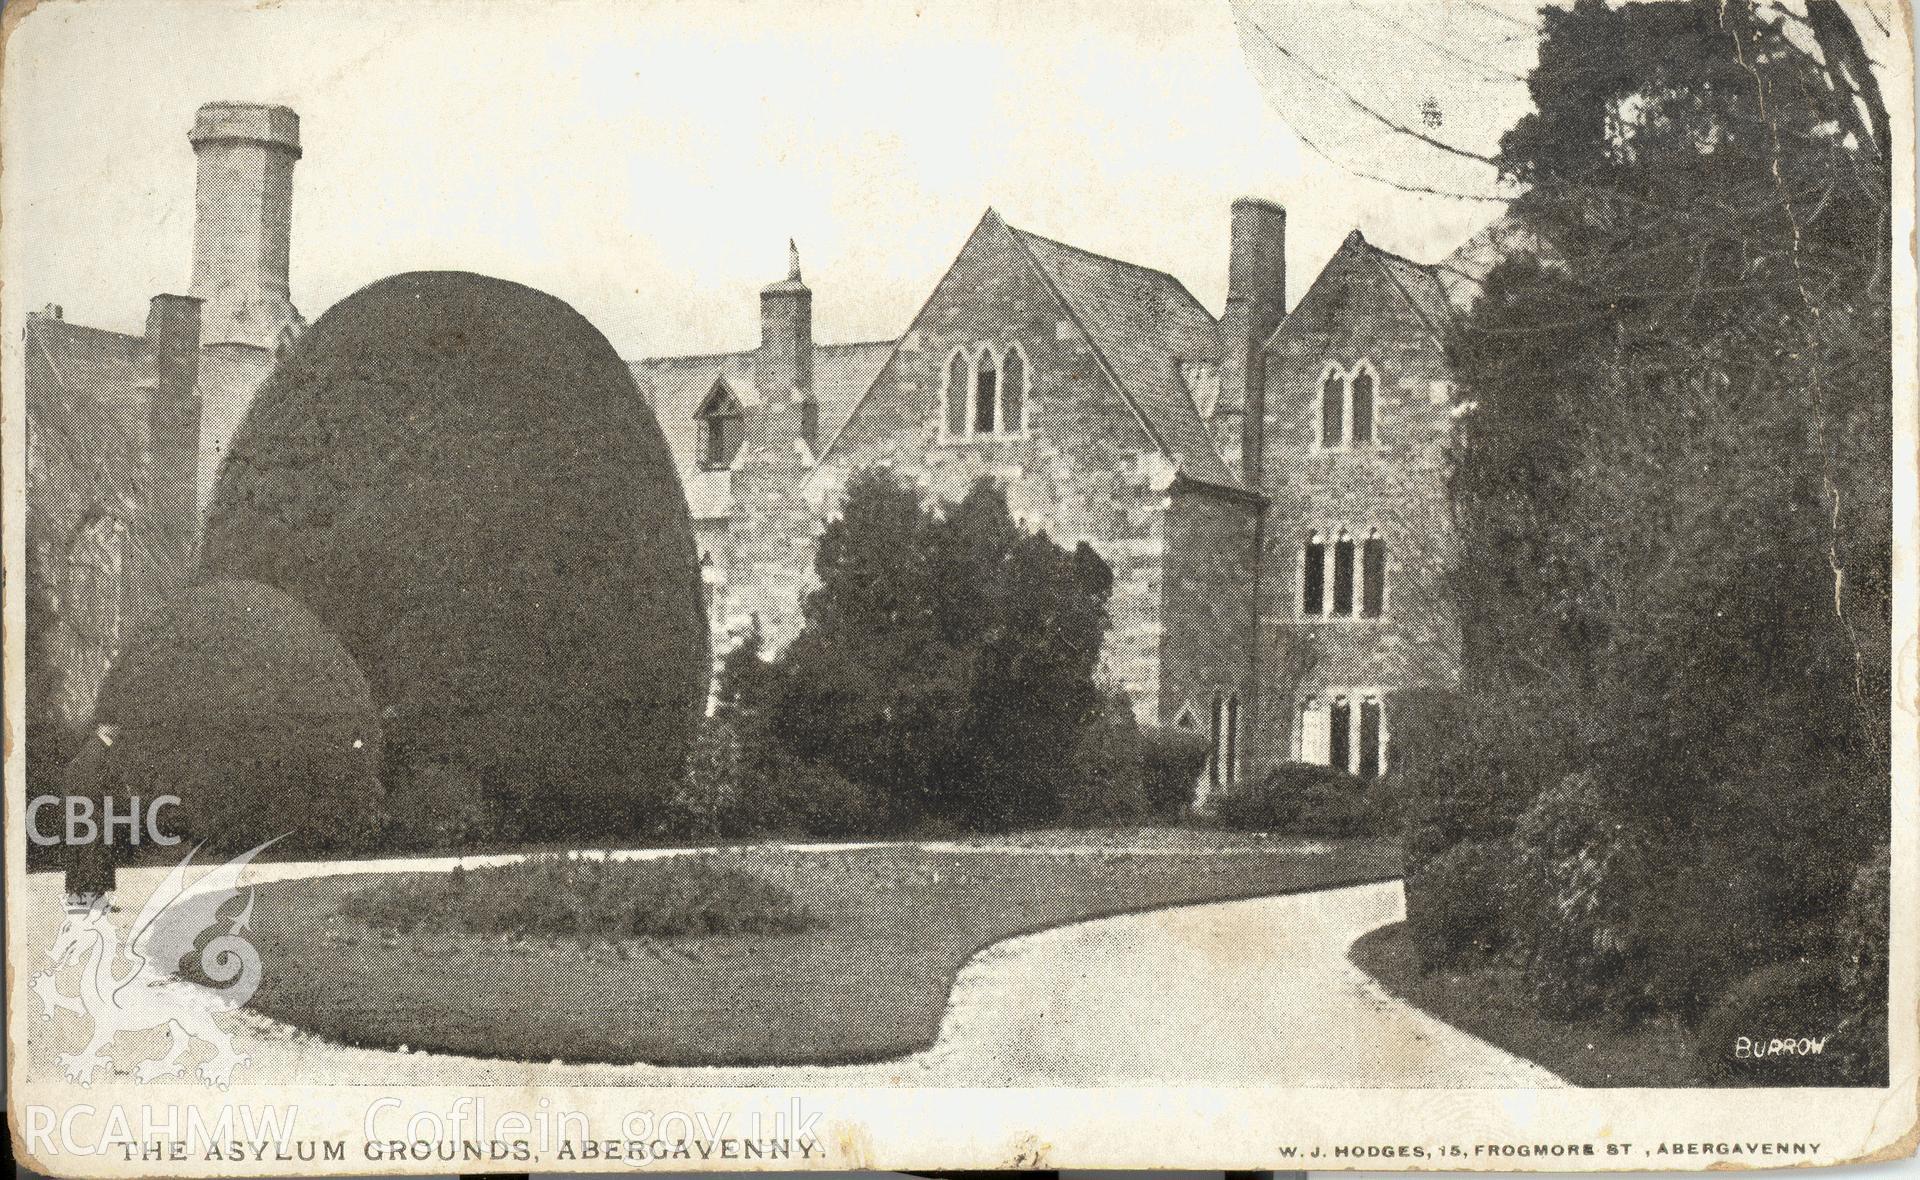 Digitised postcard image of Abergavenny Asylum, Photo by Burrow, published W.J. Hodges, 15 frogmore St. Abergavenny. Produced by Parks and Gardens Data Services, from an original item in the Peter Davis Collection at Parks and Gardens UK. We hold only web-resolution images of this collection, suitable for viewing on screen and for research purposes only. We do not hold the original images, or publication quality scans.